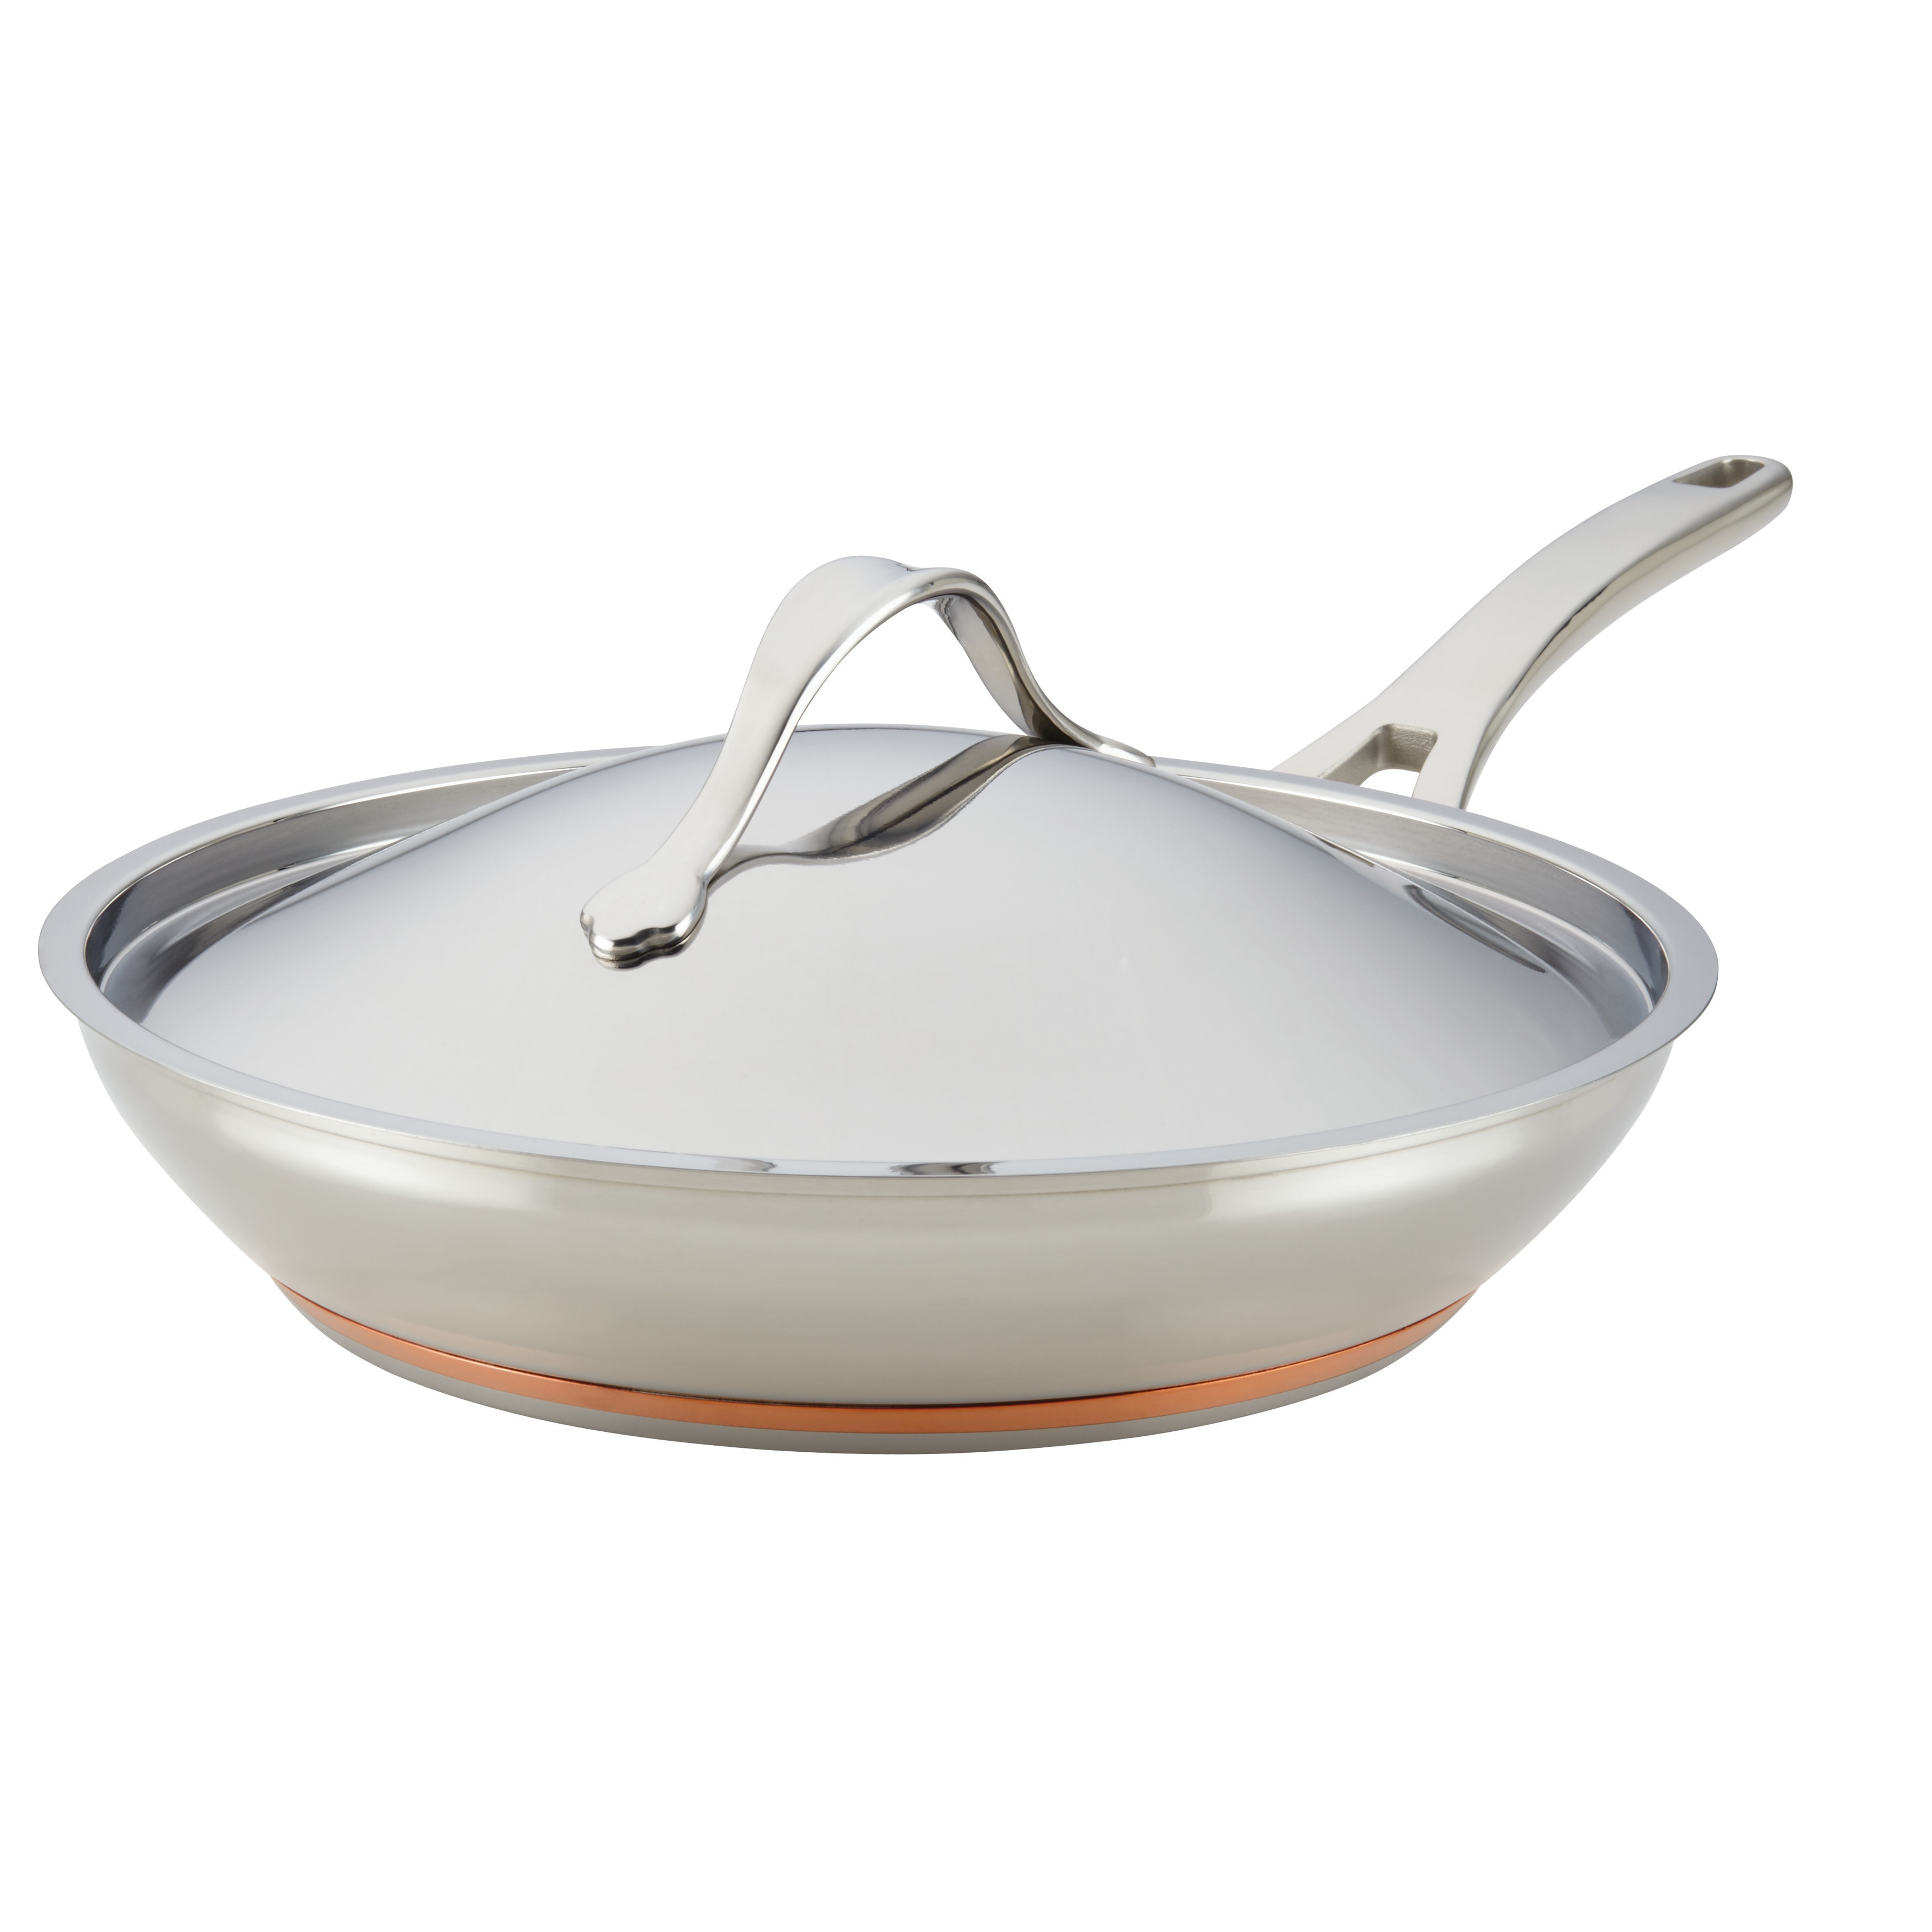 https://ak1.ostkcdn.com/images/products/12557424/Anolon-r-Nouvelle-Copper-Stainless-Steel-12-Inch-Covered-French-Skillet-4517c022-1d01-481b-b932-1b655239b404.jpg